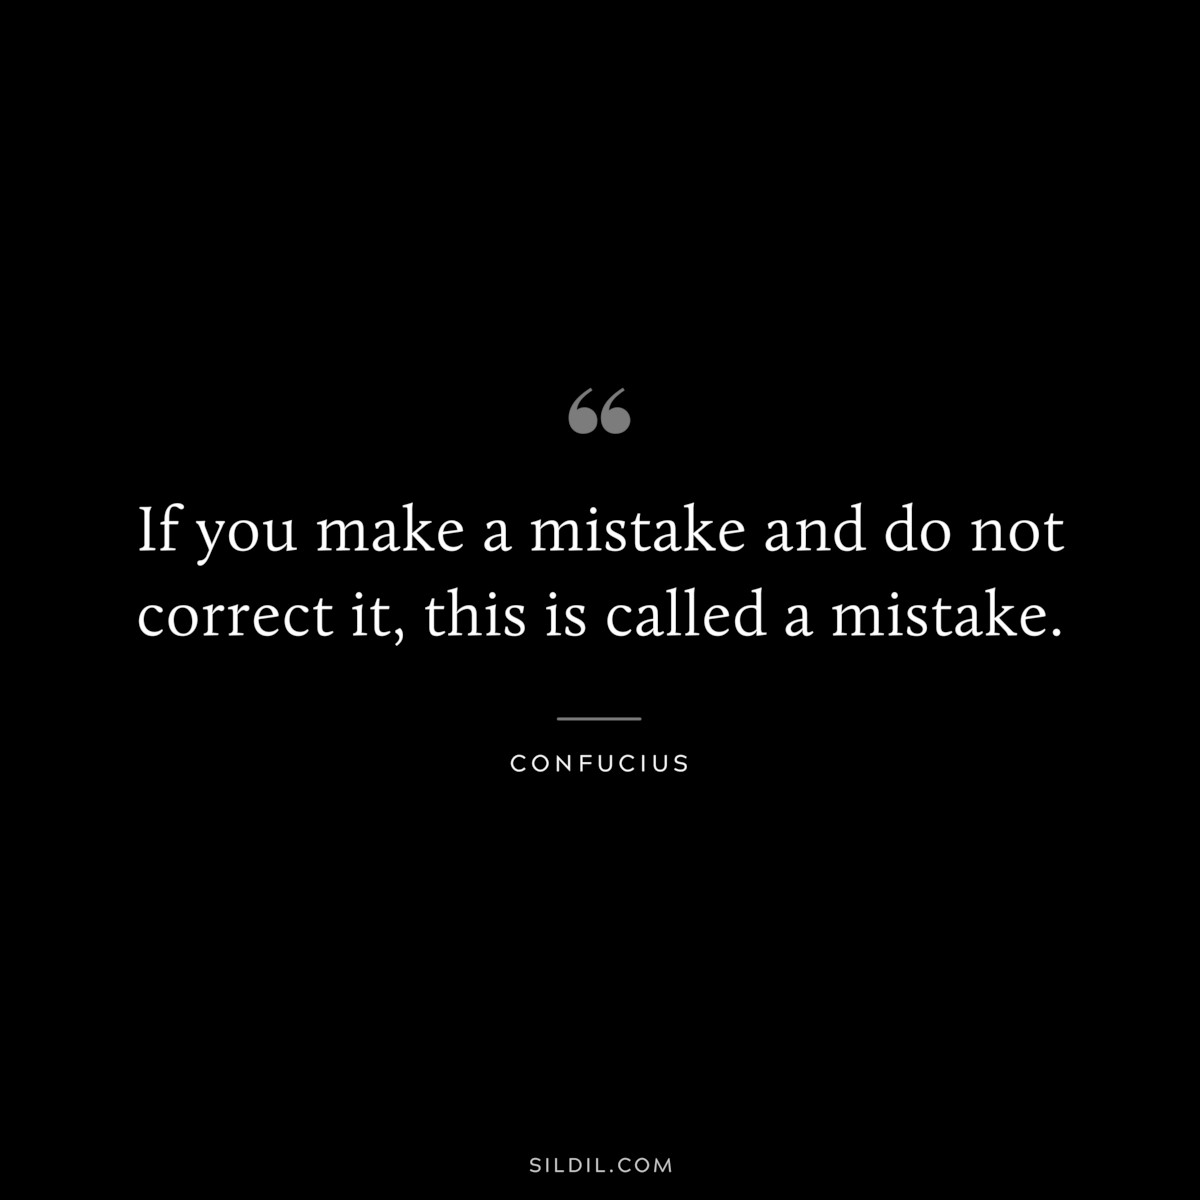 If you make a mistake and do not correct it, this is called a mistake. ― Confucius